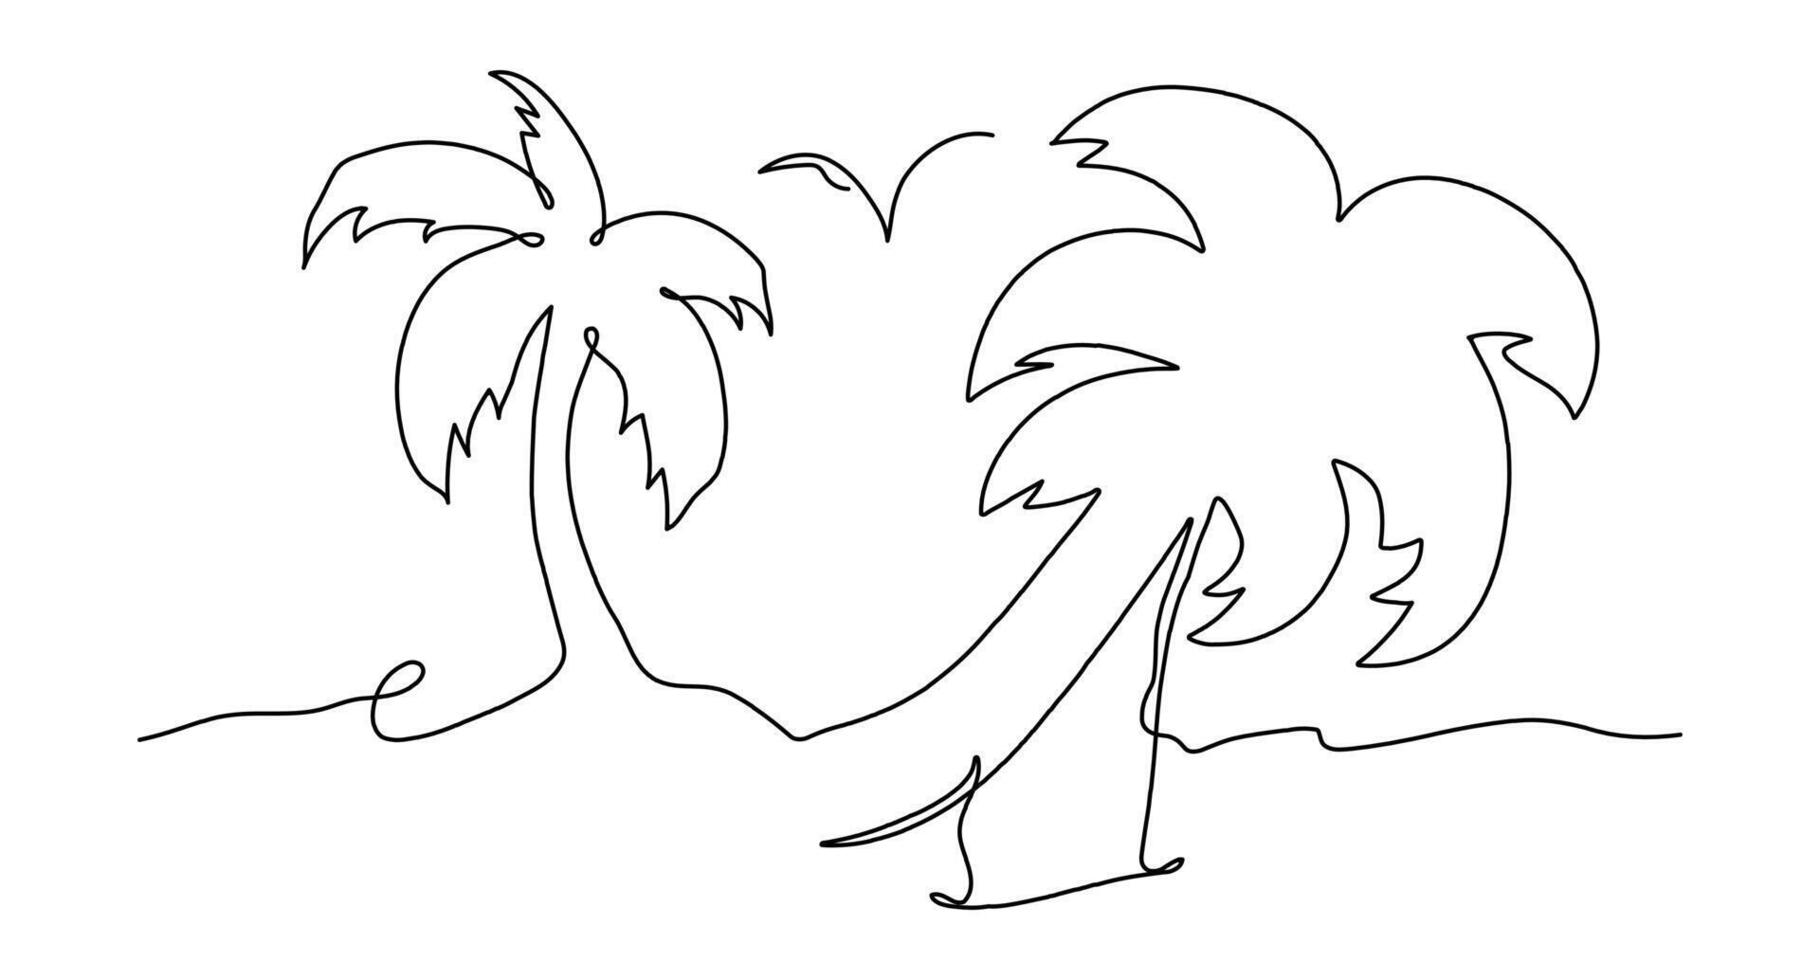 Continuous one line palm tree sketch island art. Vector abstract tropics minimal landscape illustration.